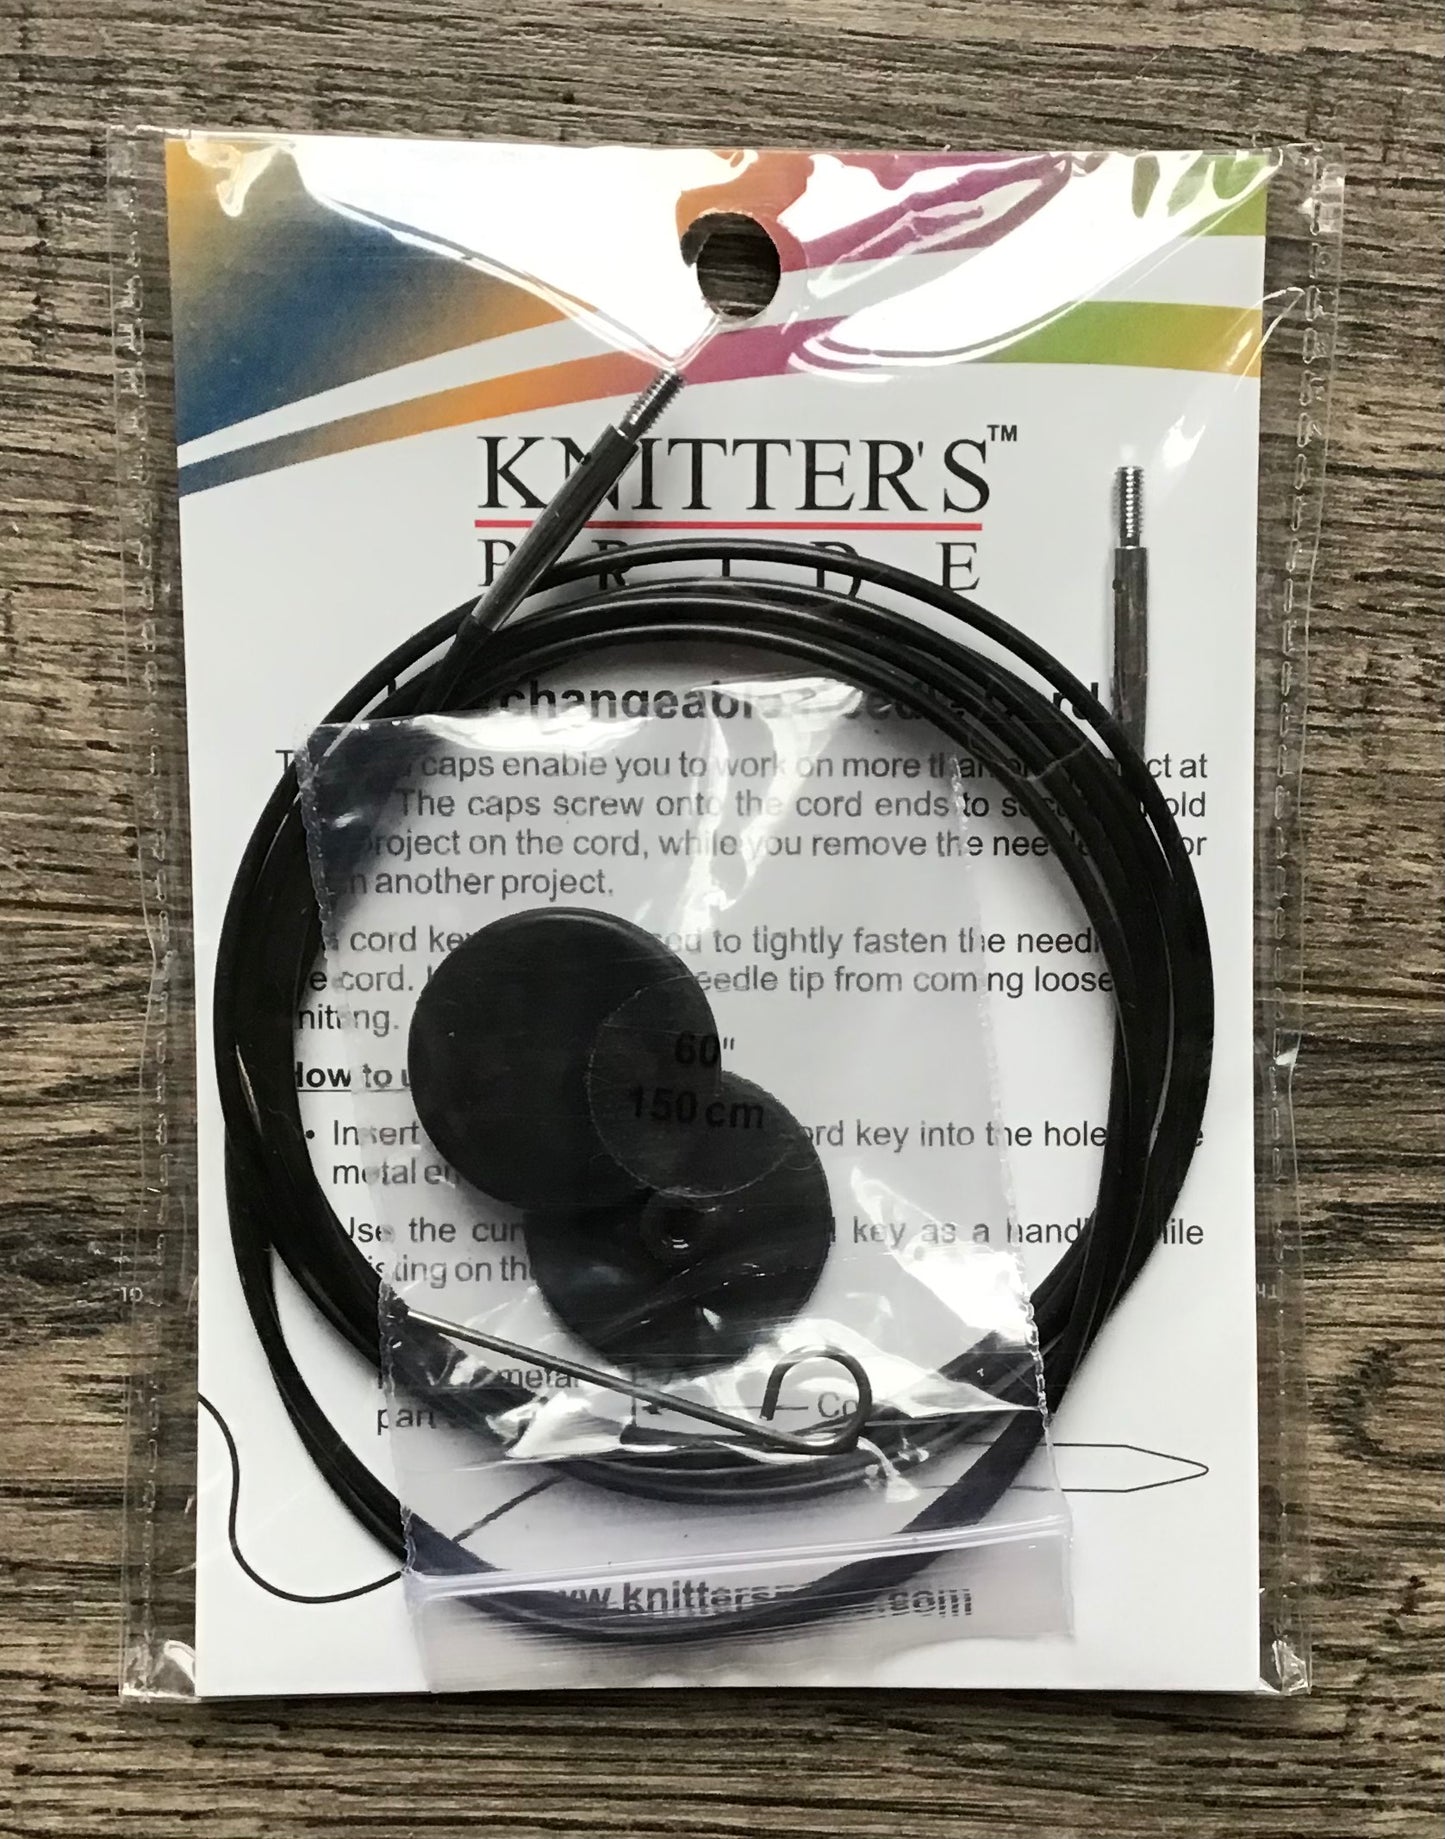 Interchangeable Color Cords for Knitter's Pride Needles